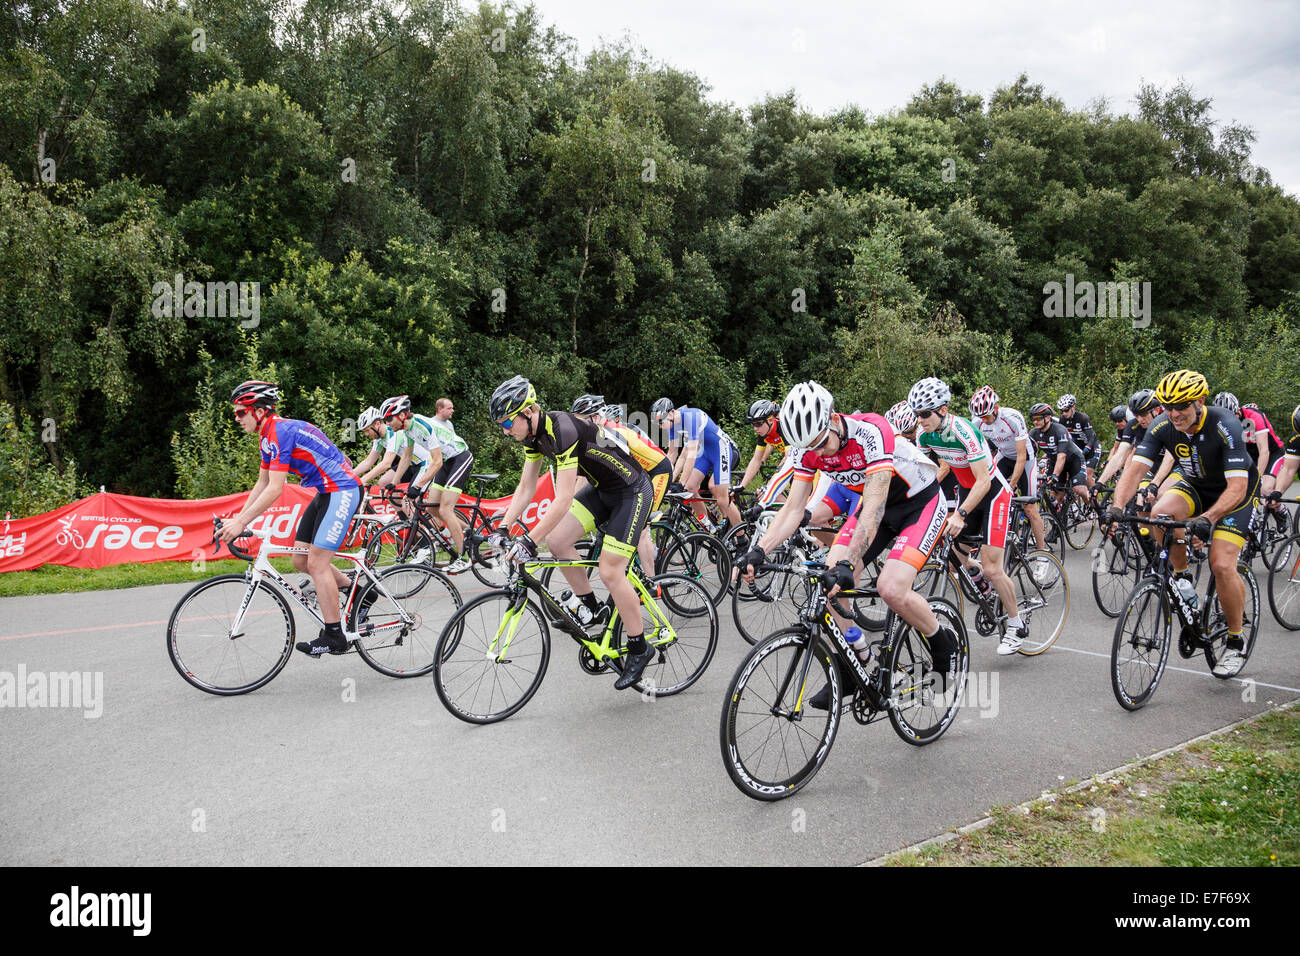 Men's Criterium bike race riders setting off from a standing start organised by British Cycling at Fowlmead Country Park Kent UK Stock Photo